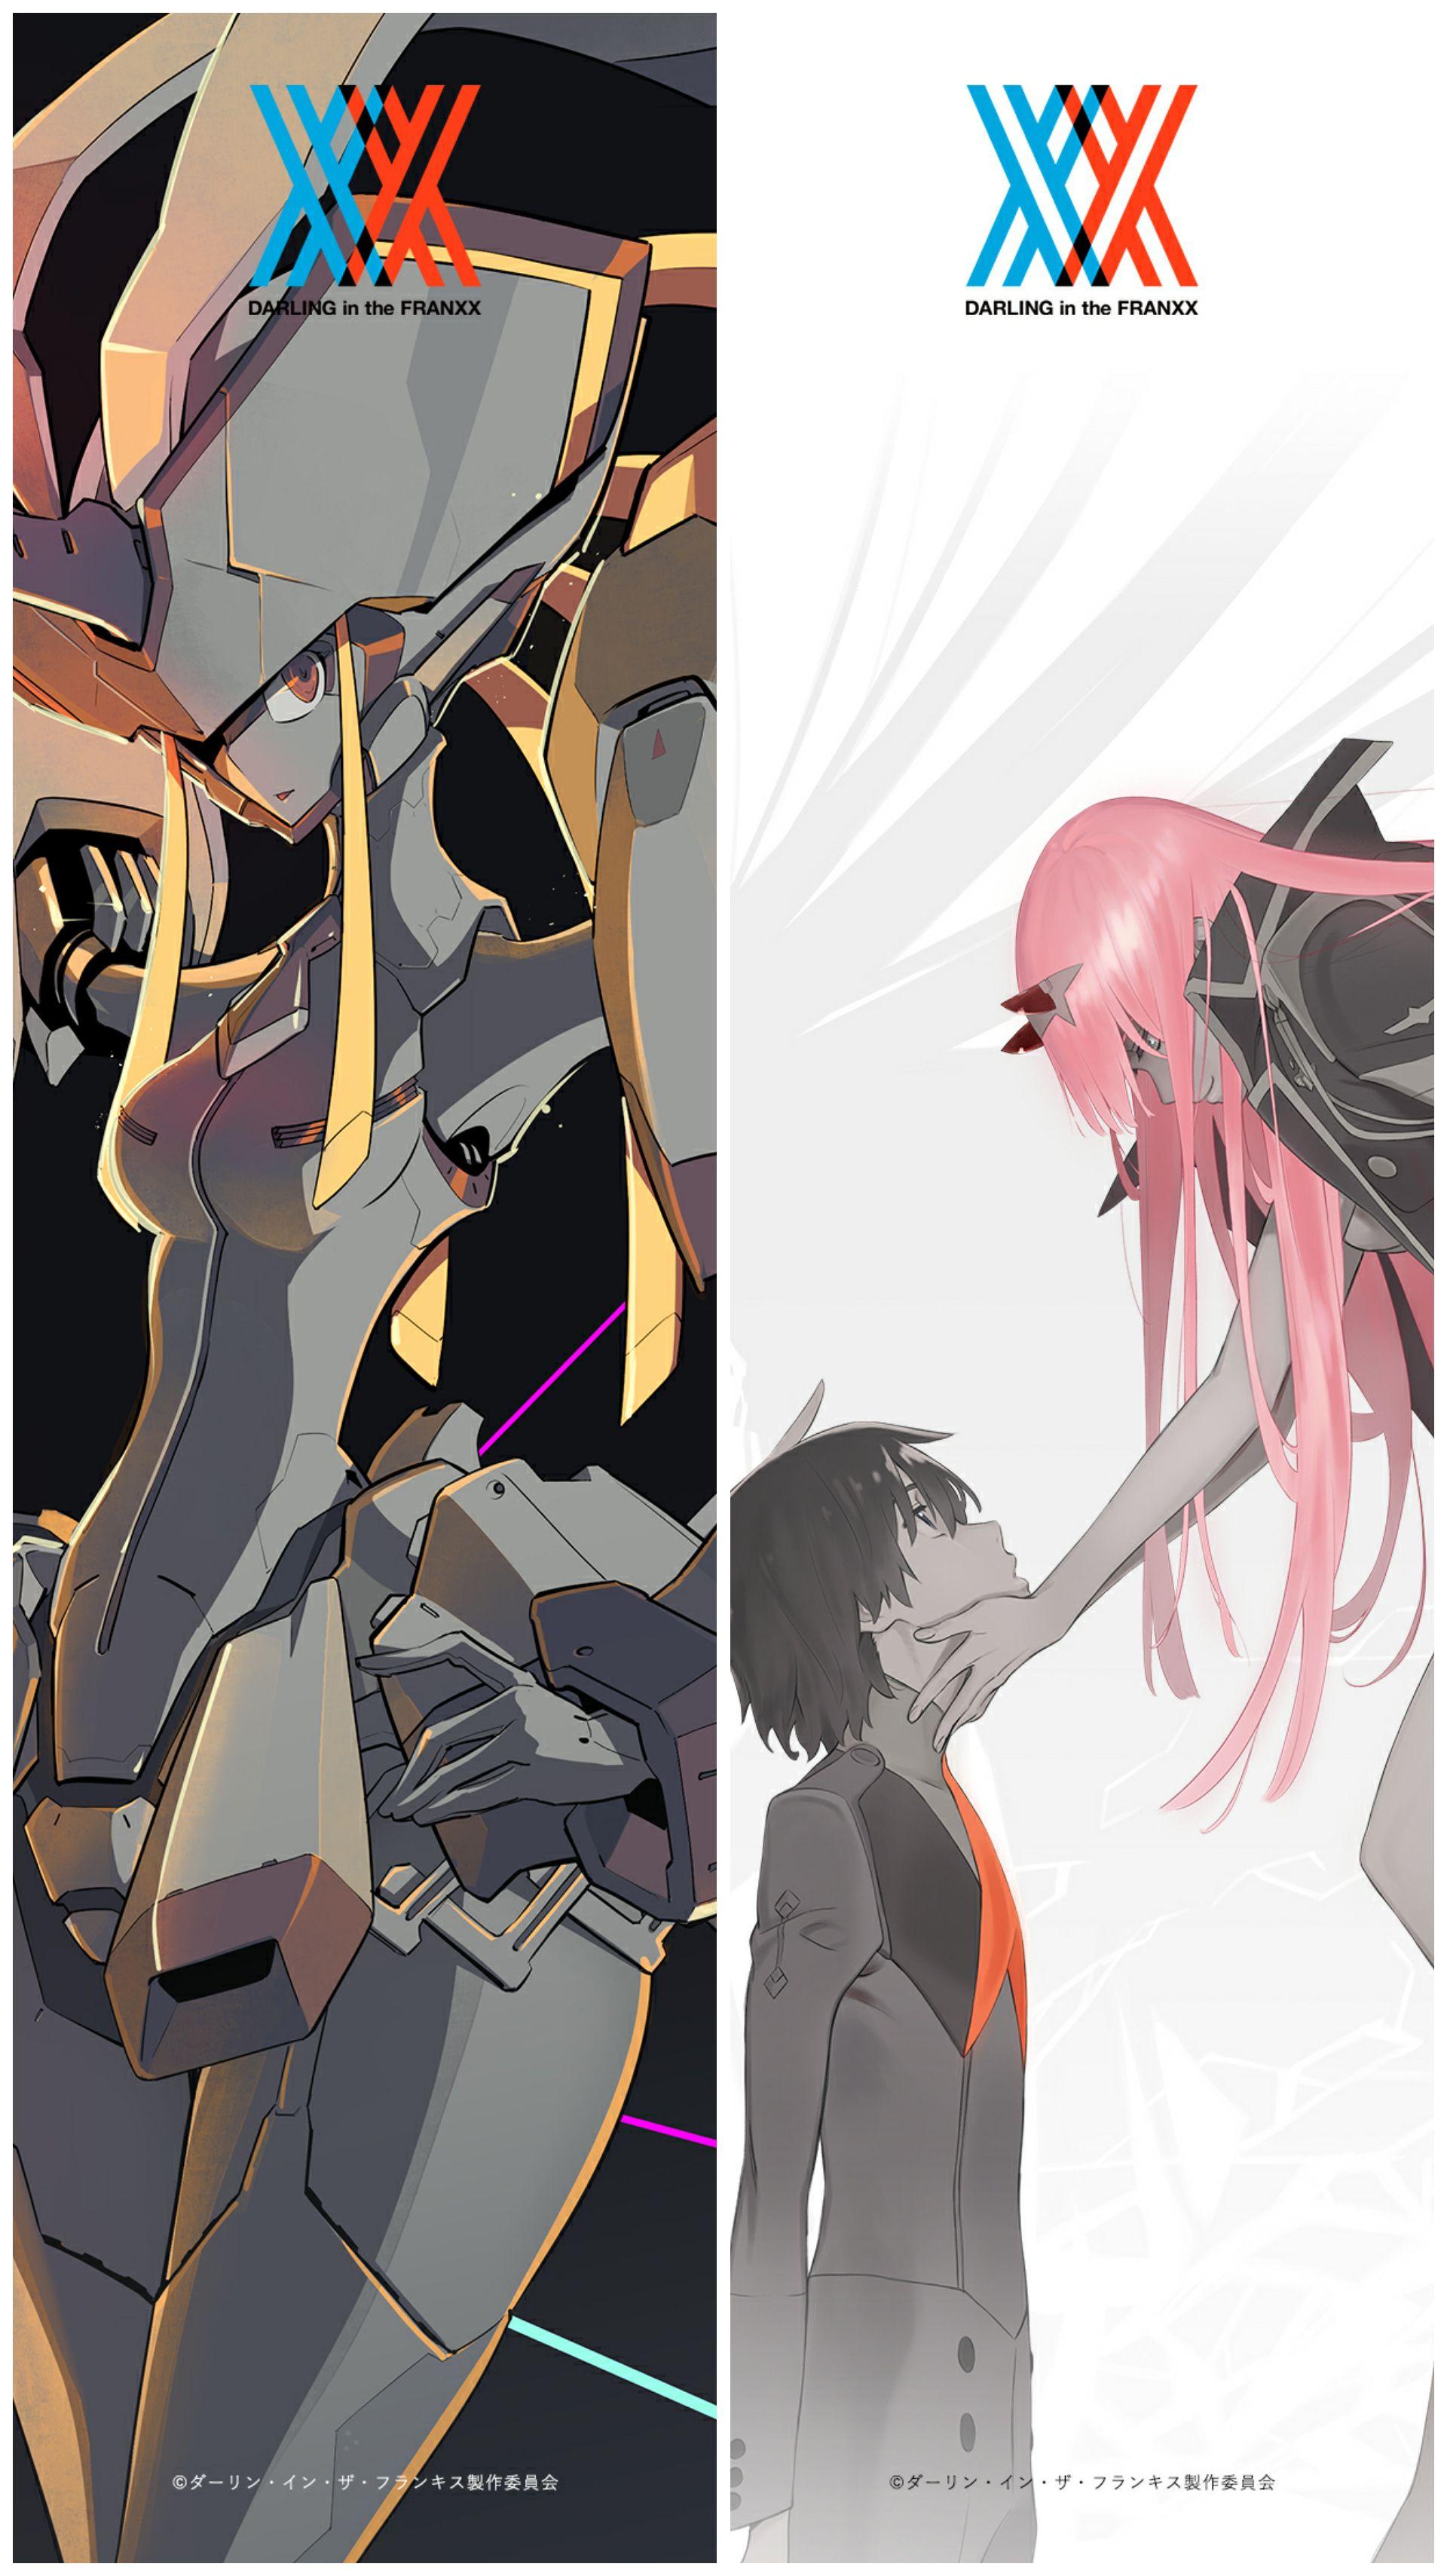 Made a Darling In The Franxx phone wallpaper for anyone who